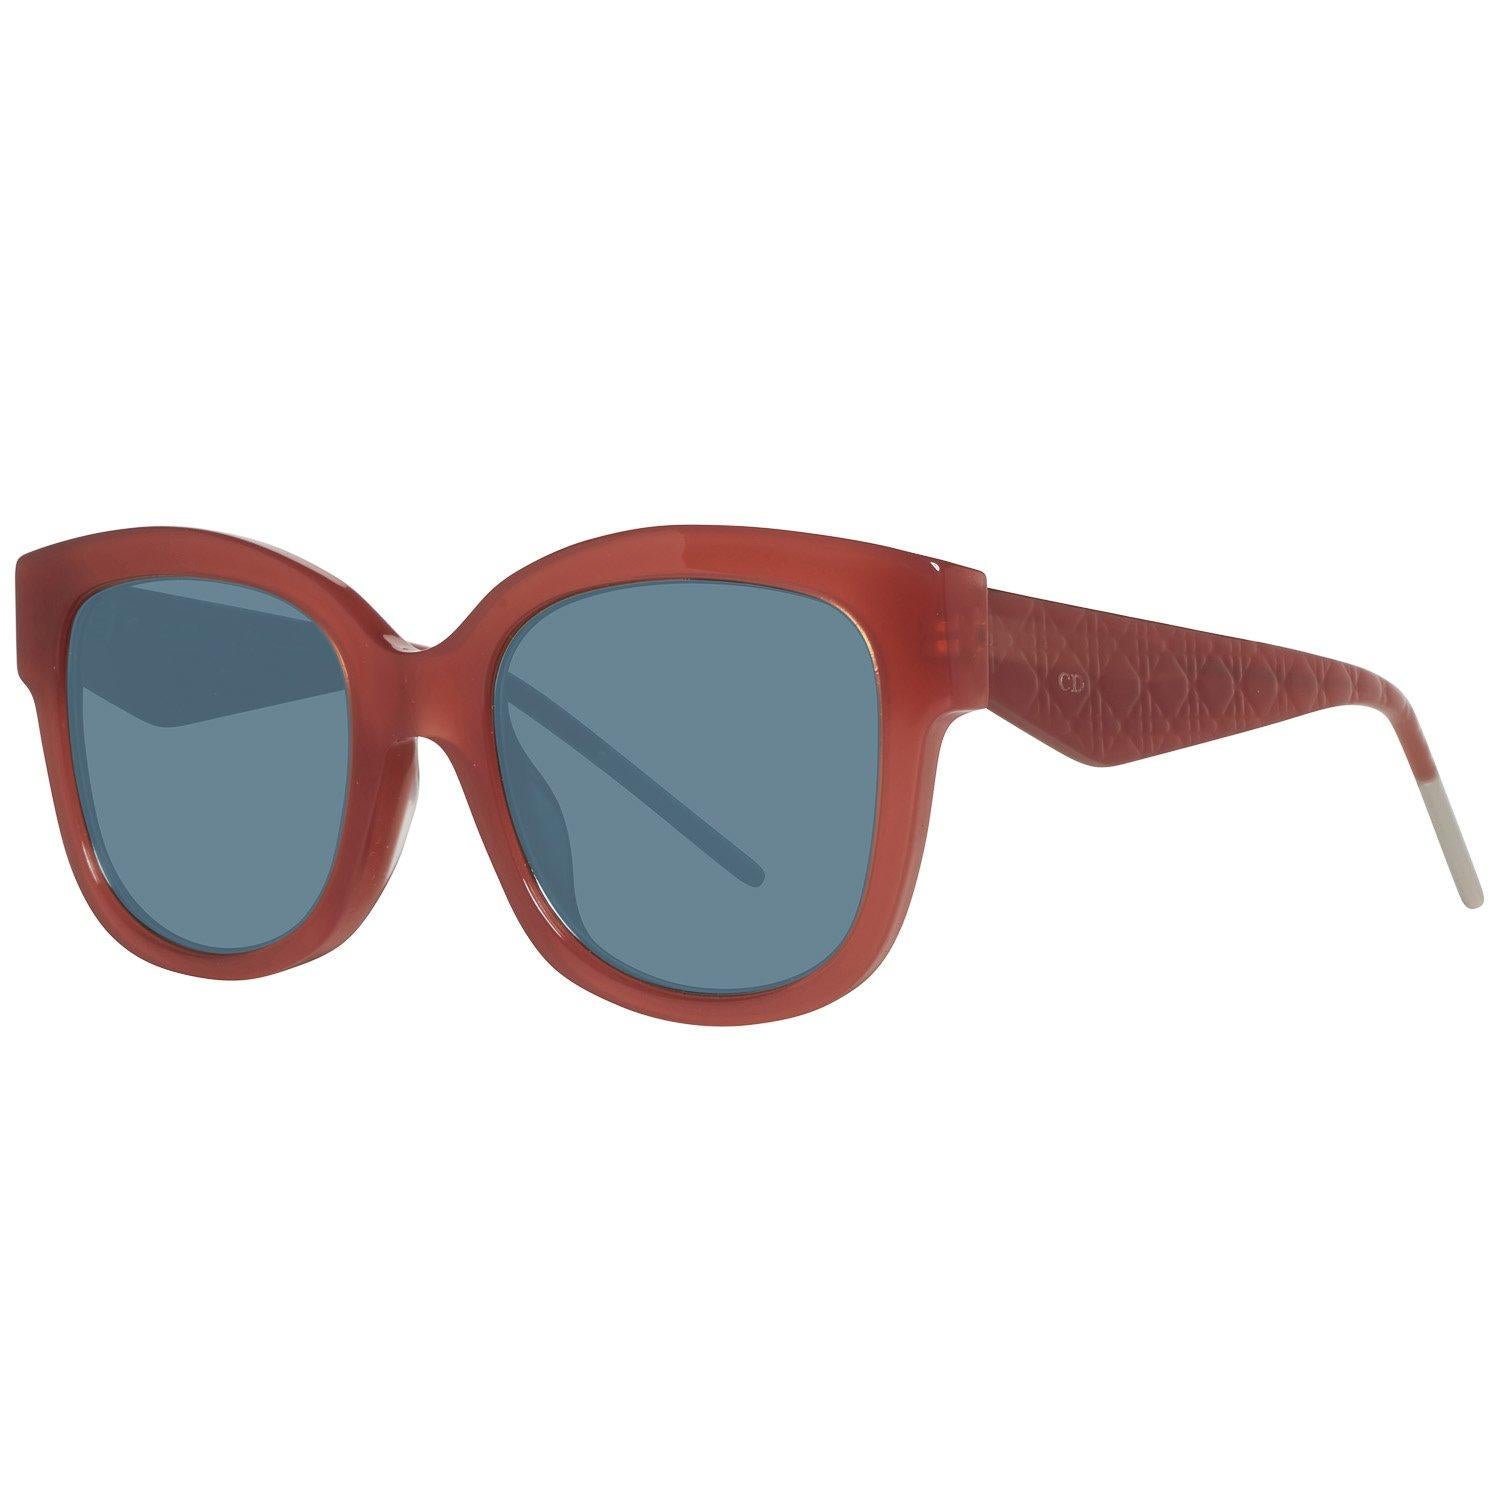 Details

MATERIAL: Acetate

COLOR: Brown

MODEL: CDVERYD1/S*4

GENDER: Women

COUNTRY OF MANUFACTURE: Italy

TYPE: Sunglasses

ORIGINAL CASE?: Yes

STYLE: Butterfly

OCCASION: Casual

FEATURES: Lightweight

LENS COLOR: Grey

LENS TECHNOLOGY: No